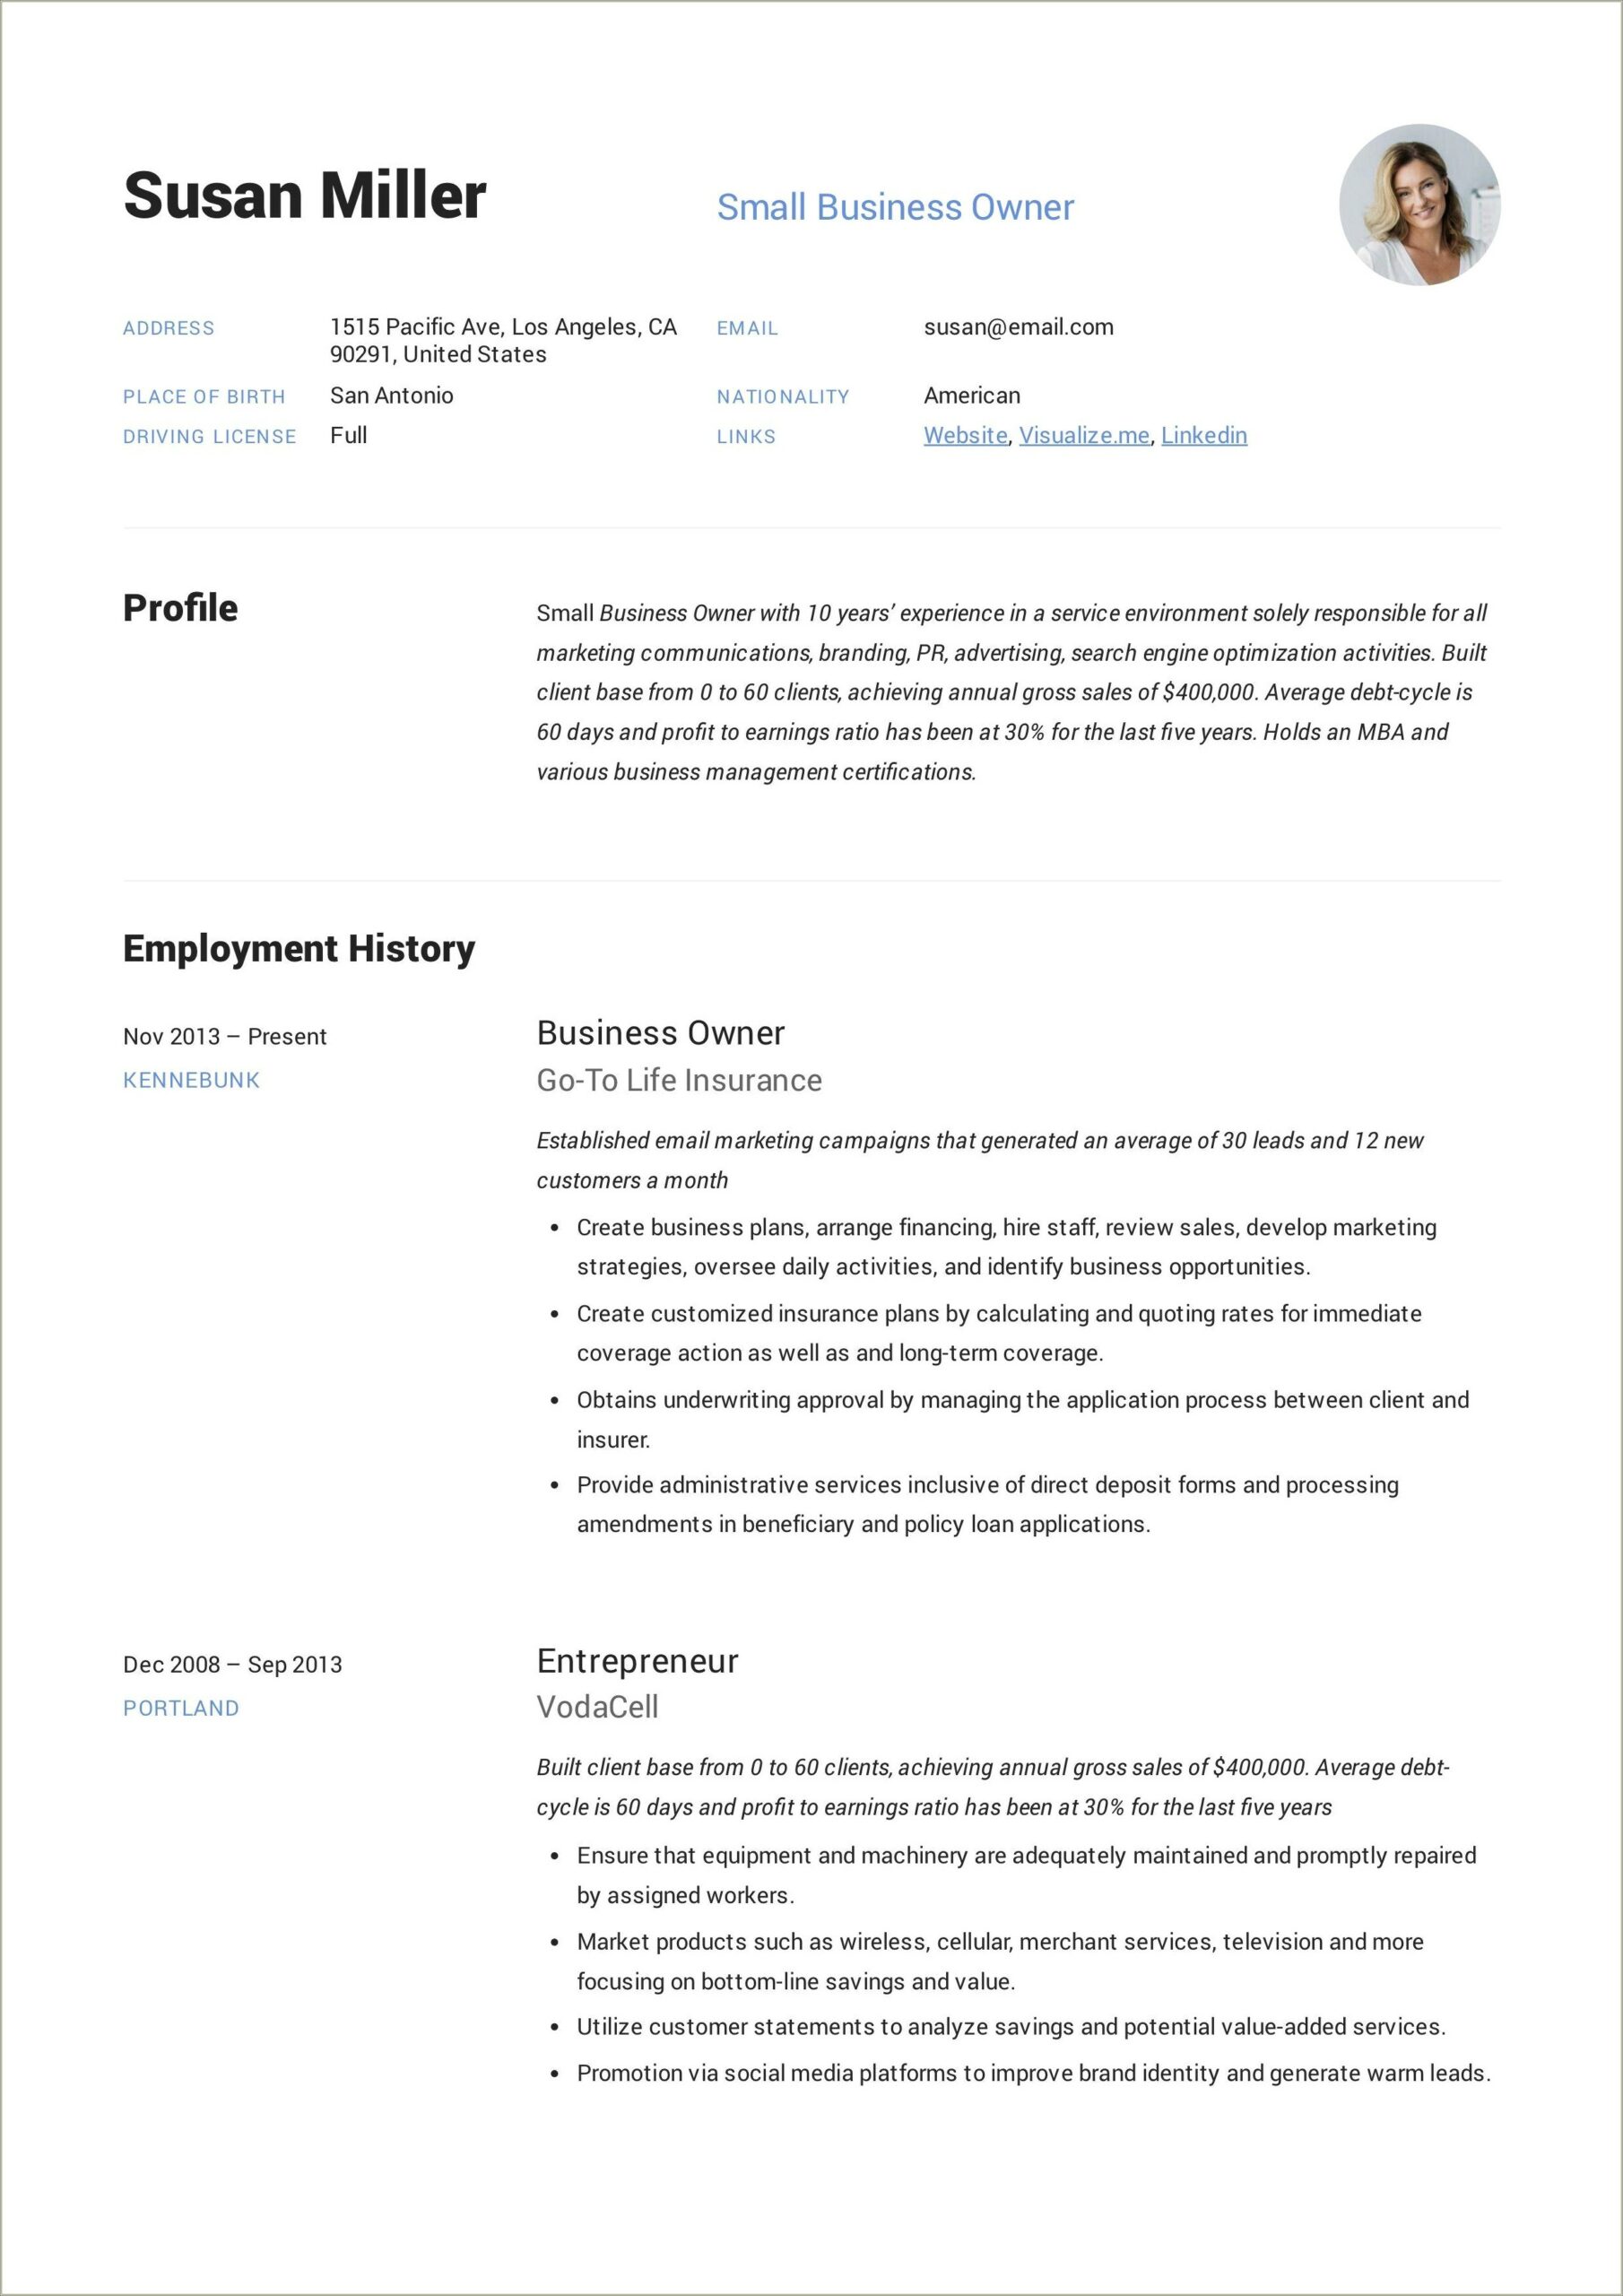 Resume Of Small Business Owner Samples